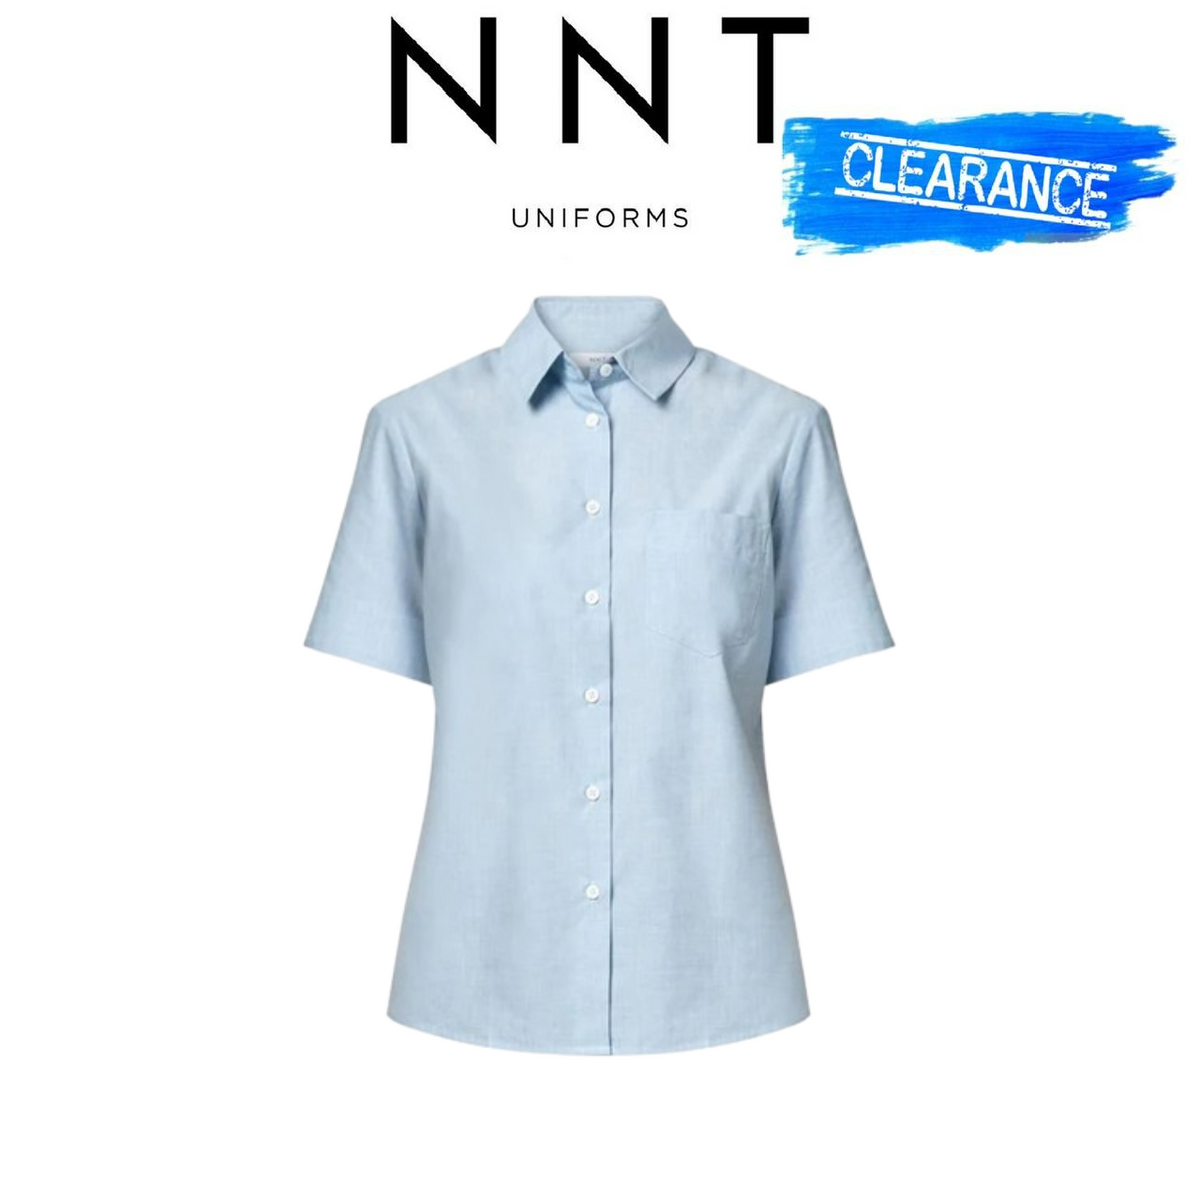 Clearance! NNT Textured S/S Shirt Classic Fit Collared Business Shirt CATUDJ